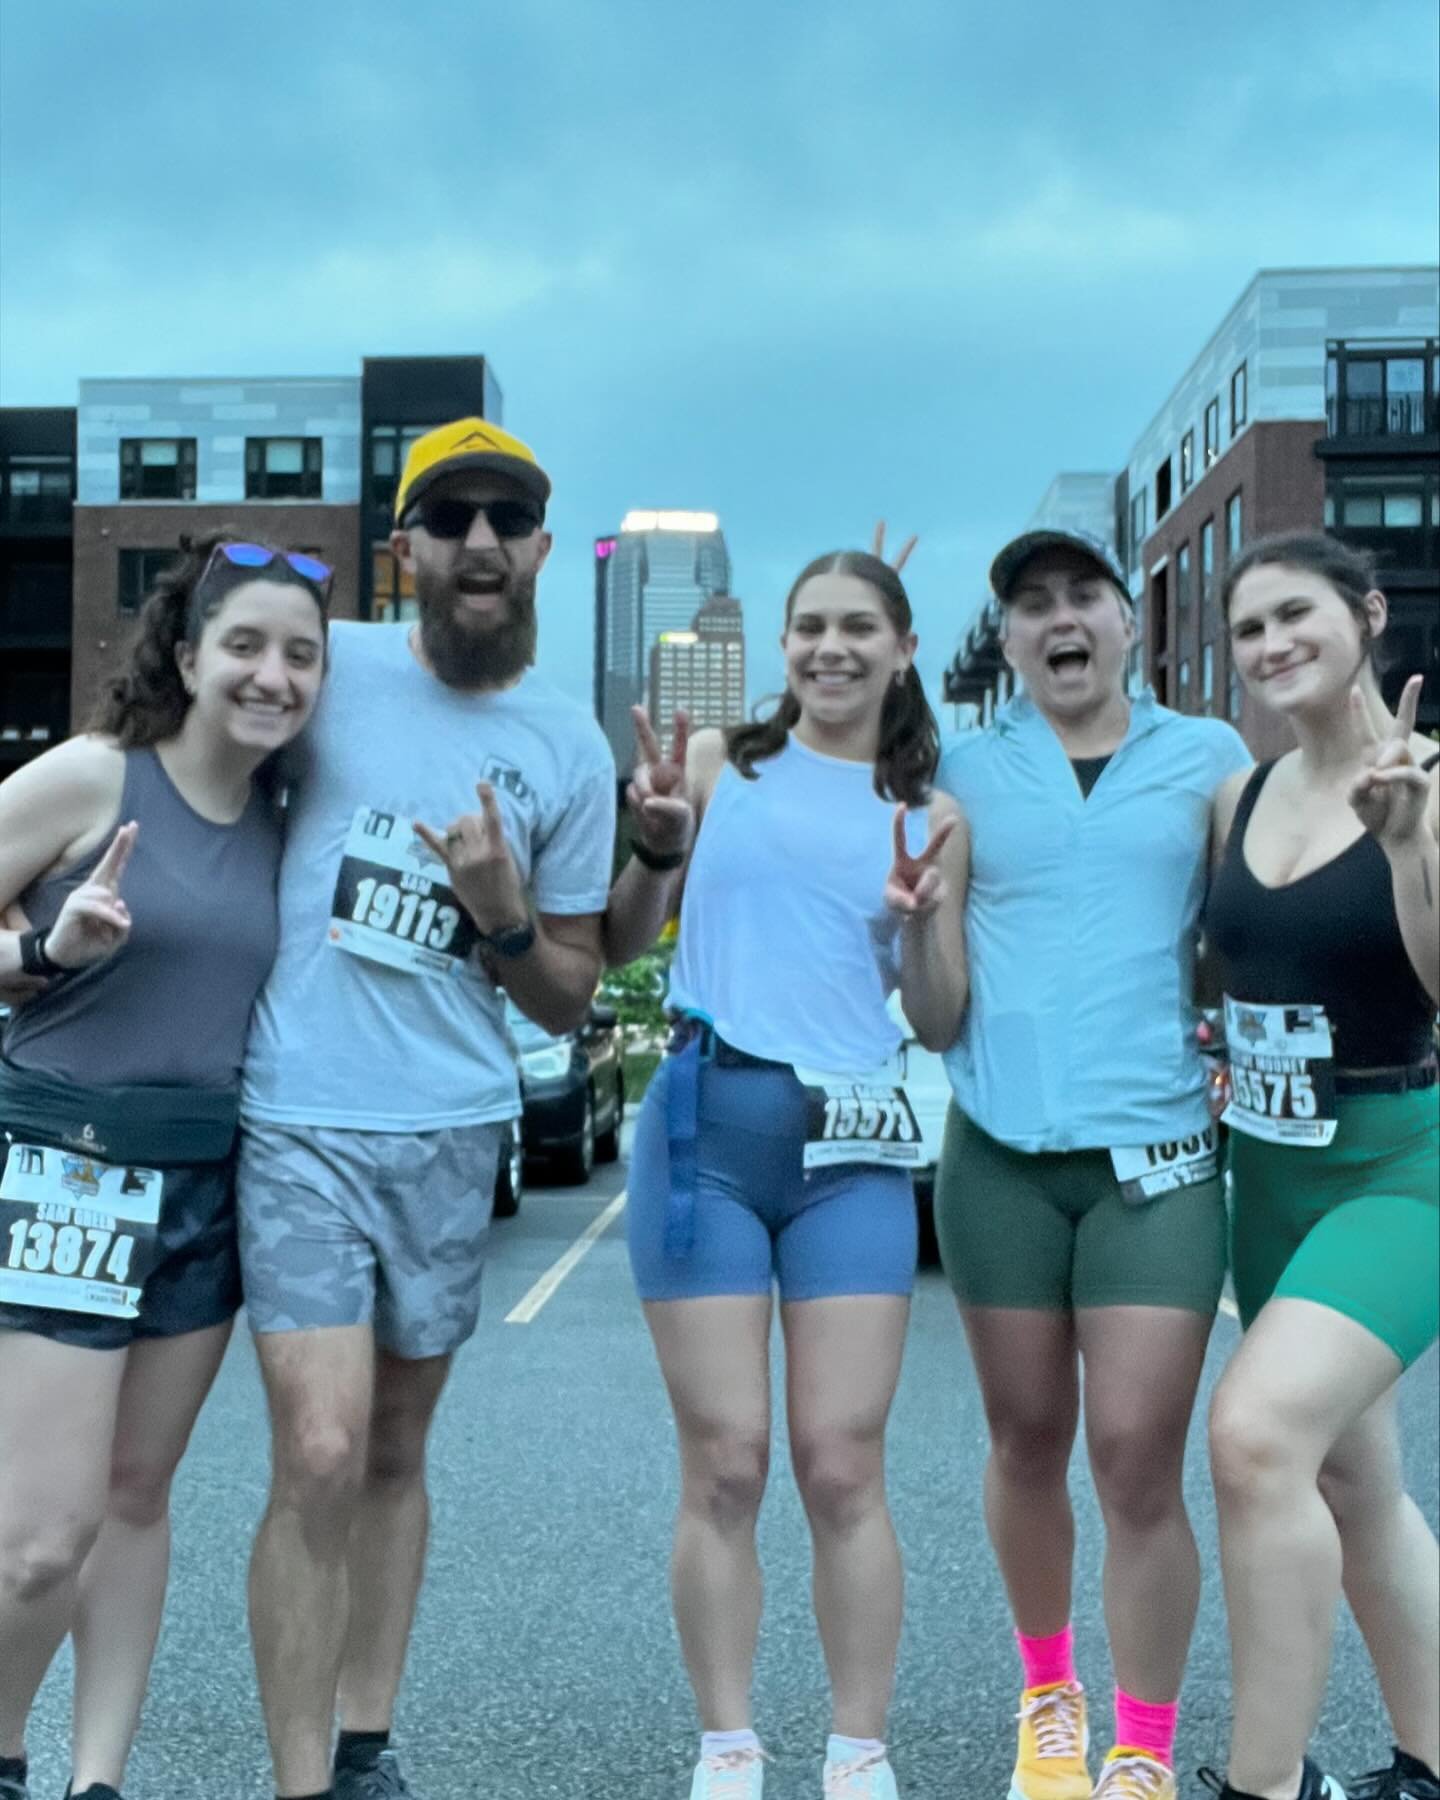 Big shout out to this crew for crushing it this past weekend at the @pghmarathon 😁🤘🏻

Fitness adventures with friends is truly just one of the best things.

#nobefit #befit #fitness #bestrong #northbethel #friends #reggies #marathon #halfmarathon